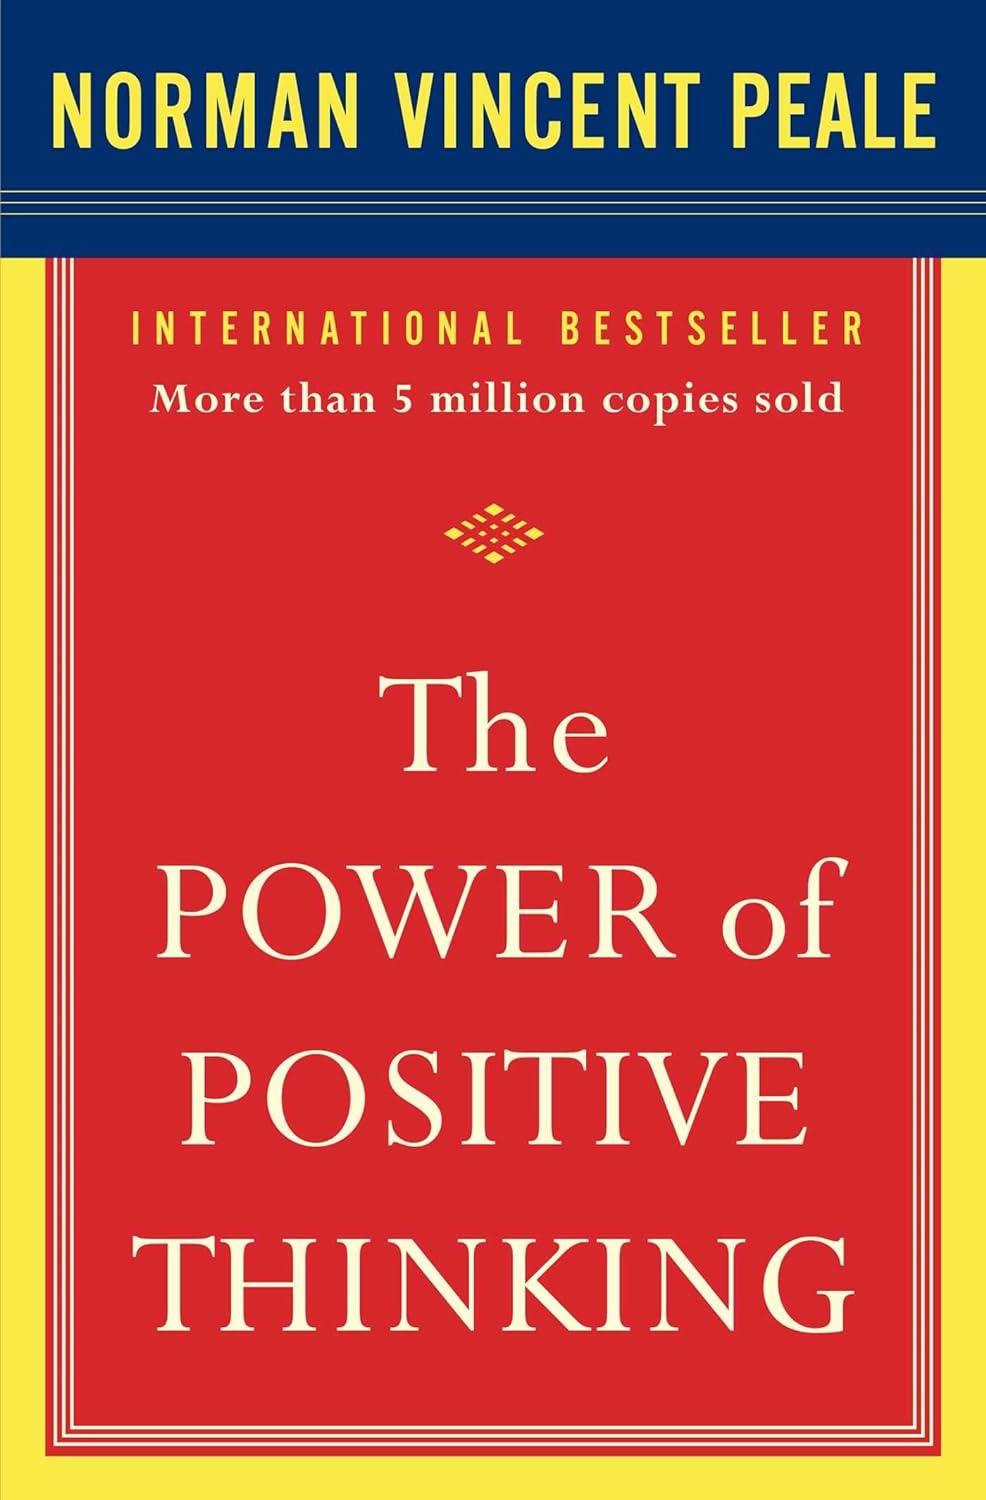 An international bestseller with over five million copies in print, The Power of Positive Thinking has helped men and women around the world to achieve fulfillment in their lives through Dr. Norman Vincent Peale’s powerful message of faith and inspiration. In this phenomenal bestseller, “written with the sole objective of helping the reader achieve a happy, satisfying, and worthwhile life,” Dr. Peale demonstrates the power of faith in action. With the practical techniques outlined in this book, you can energize your life—and give yourself the initiative needed to carry out your ambitions and hopes.